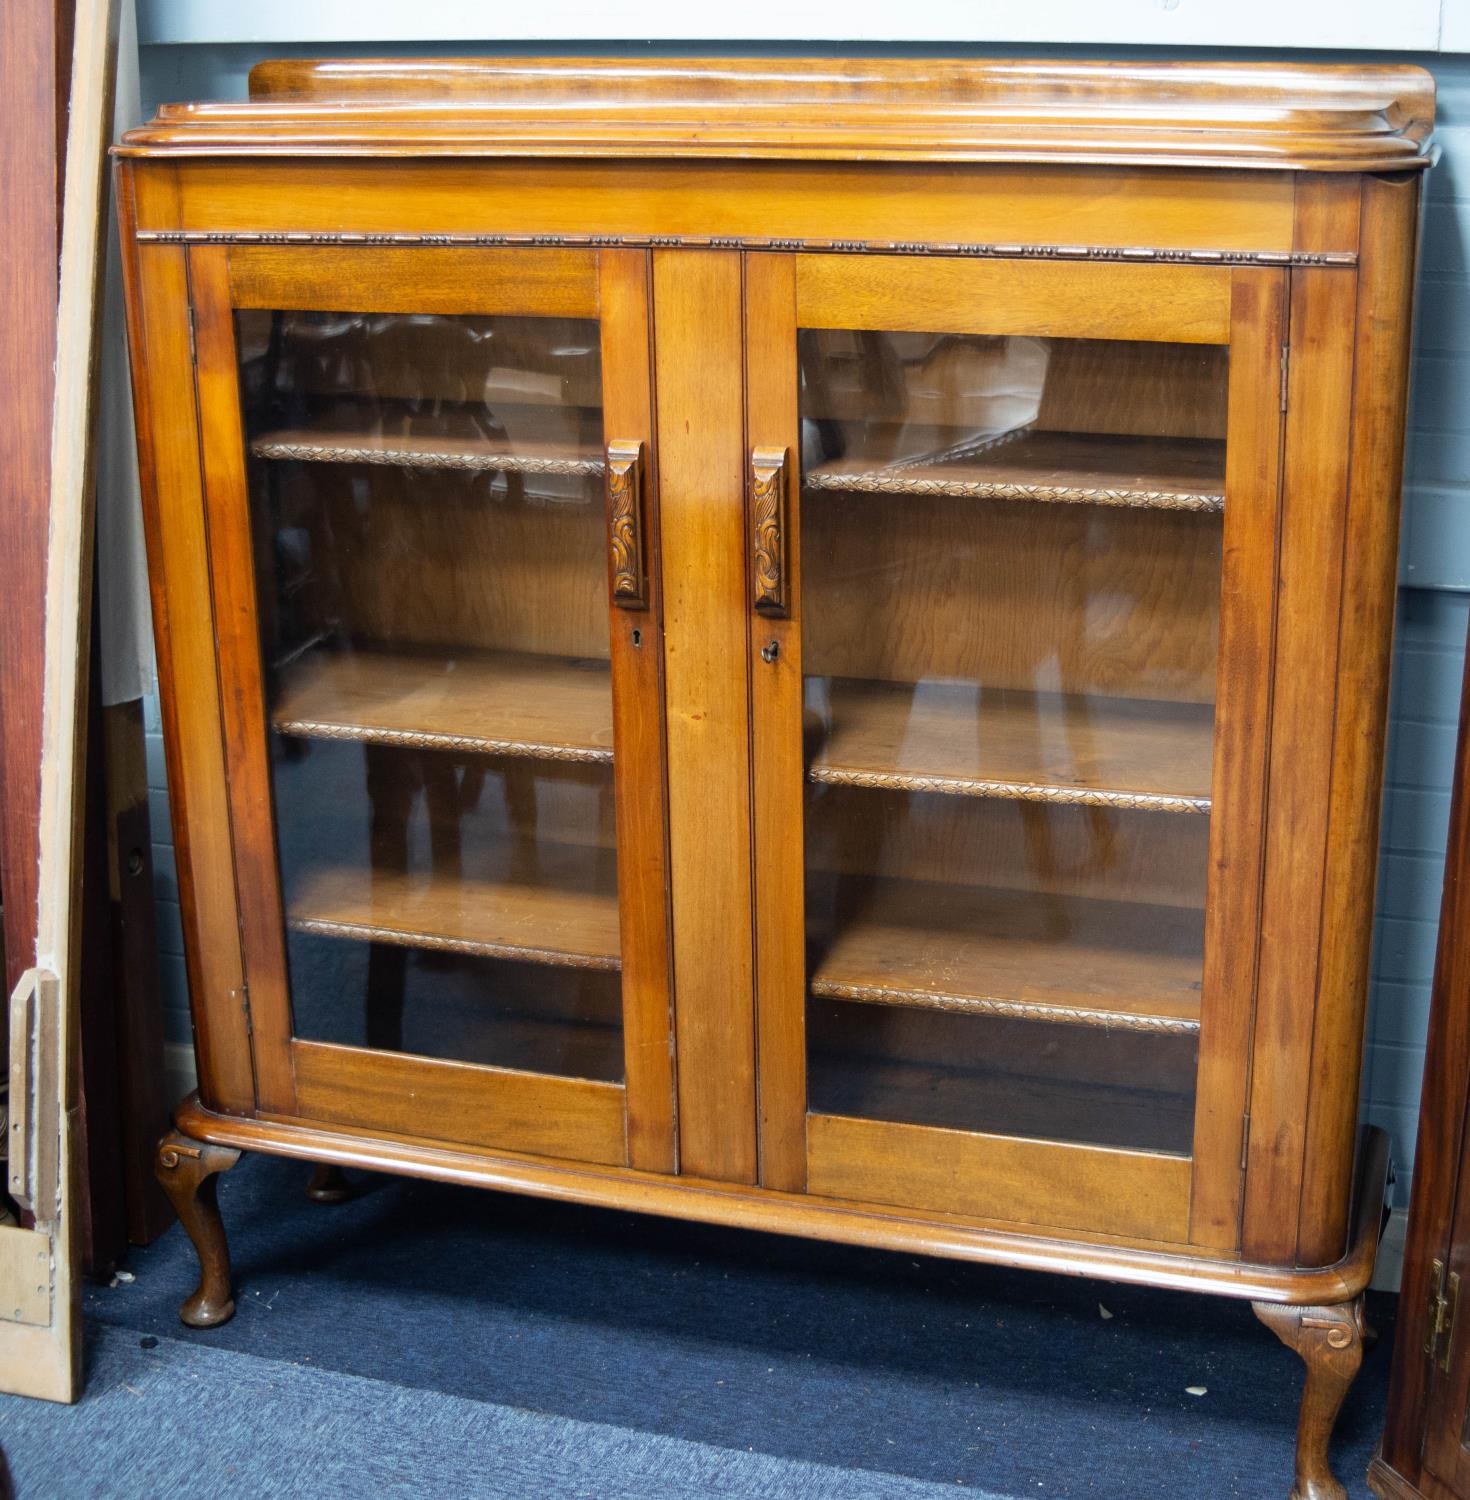 ART DECO PERIOD MAHOGANY SMALL BOOKCASE/DISPLAY CABINET with two glazed doors enclosing three wooden